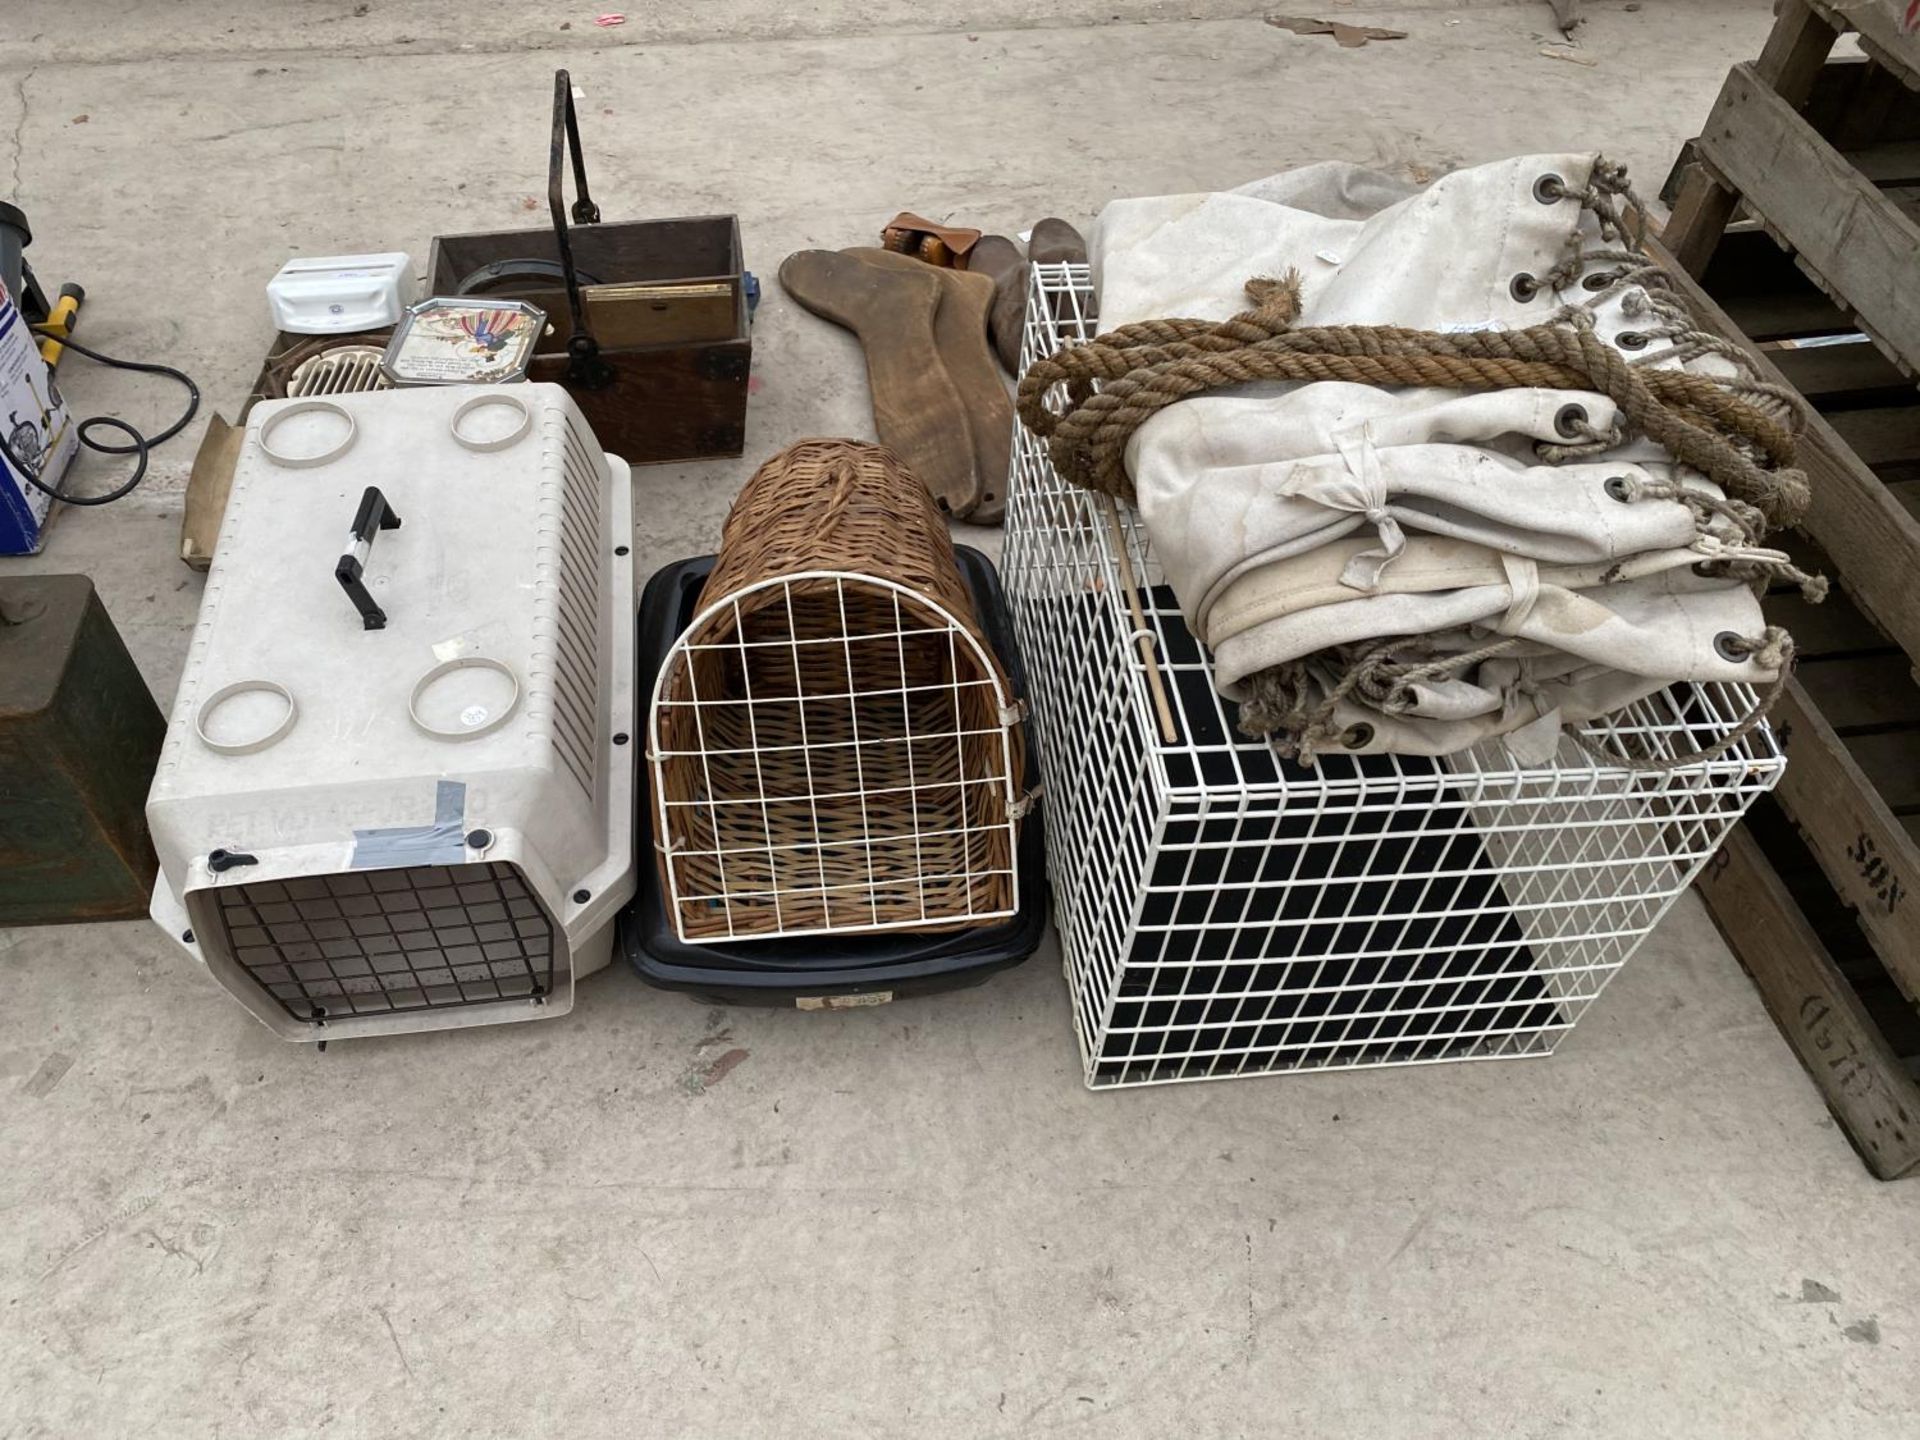 THREE PET CARRIERS AND A TARPAULIN SHEET